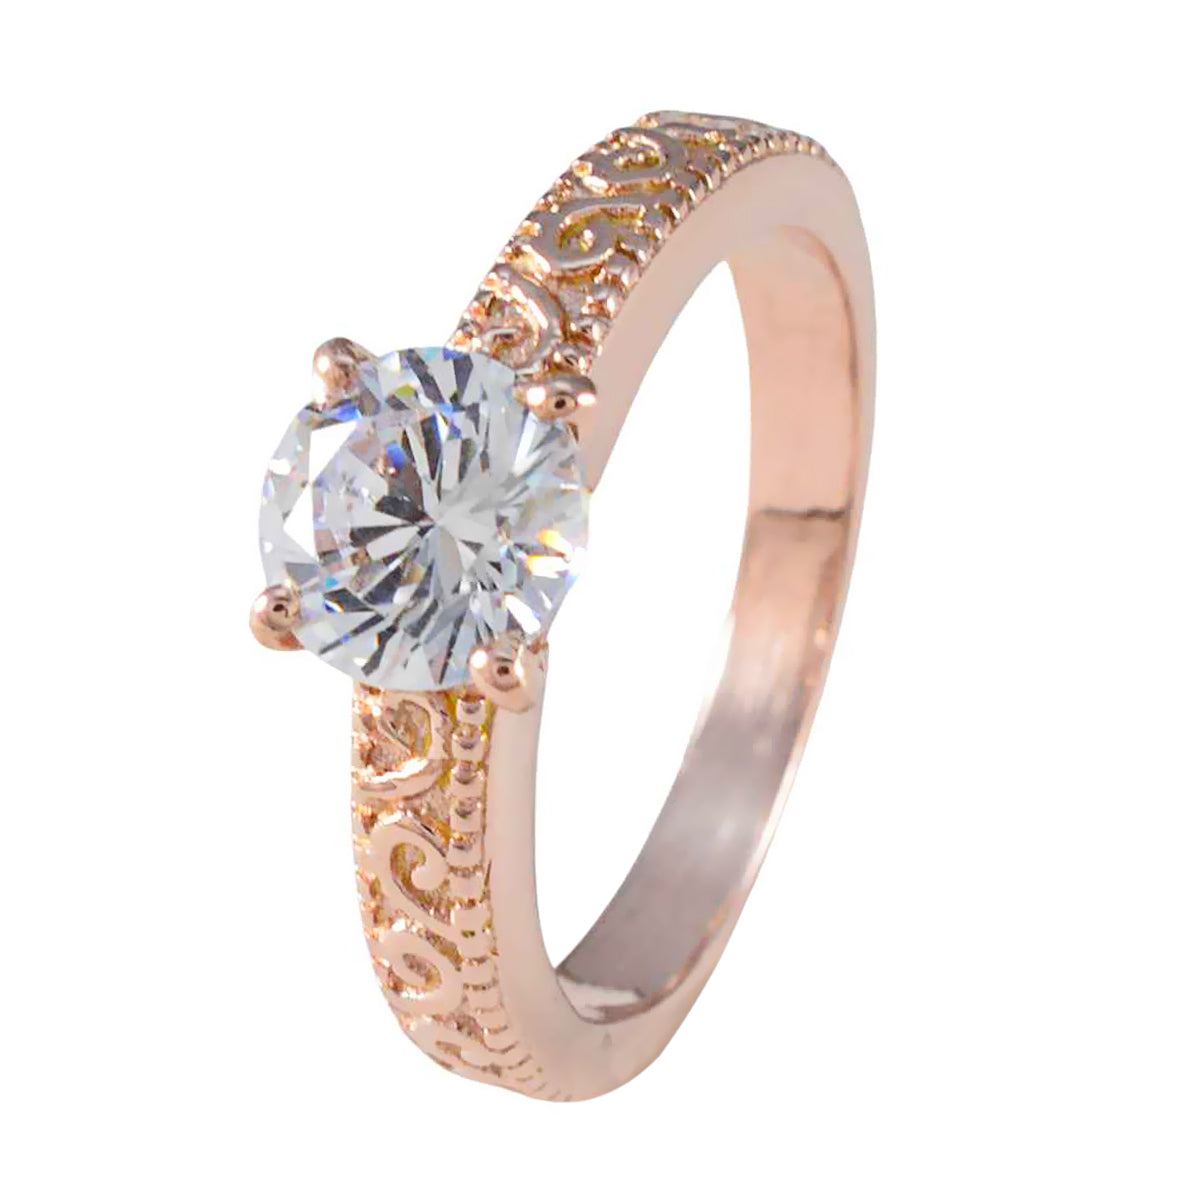 Riyo Extensive Silver Ring With Rose Gold Plating White CZ Stone Round Shape Prong Setting Bridal Jewelry Birthday Ring